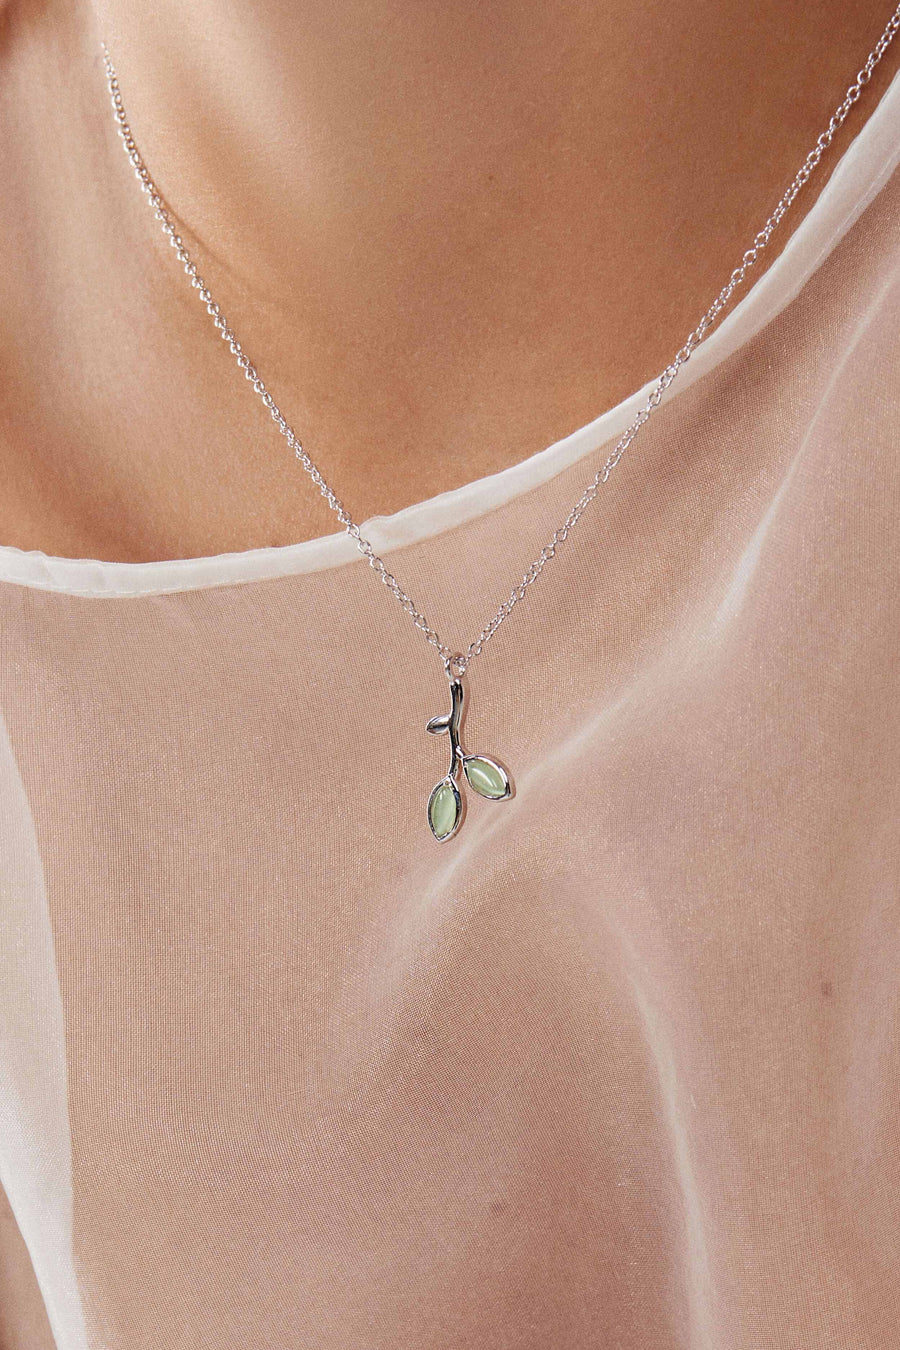 Lovesick Jewelry Sterling Silver Green Leaf Necklace